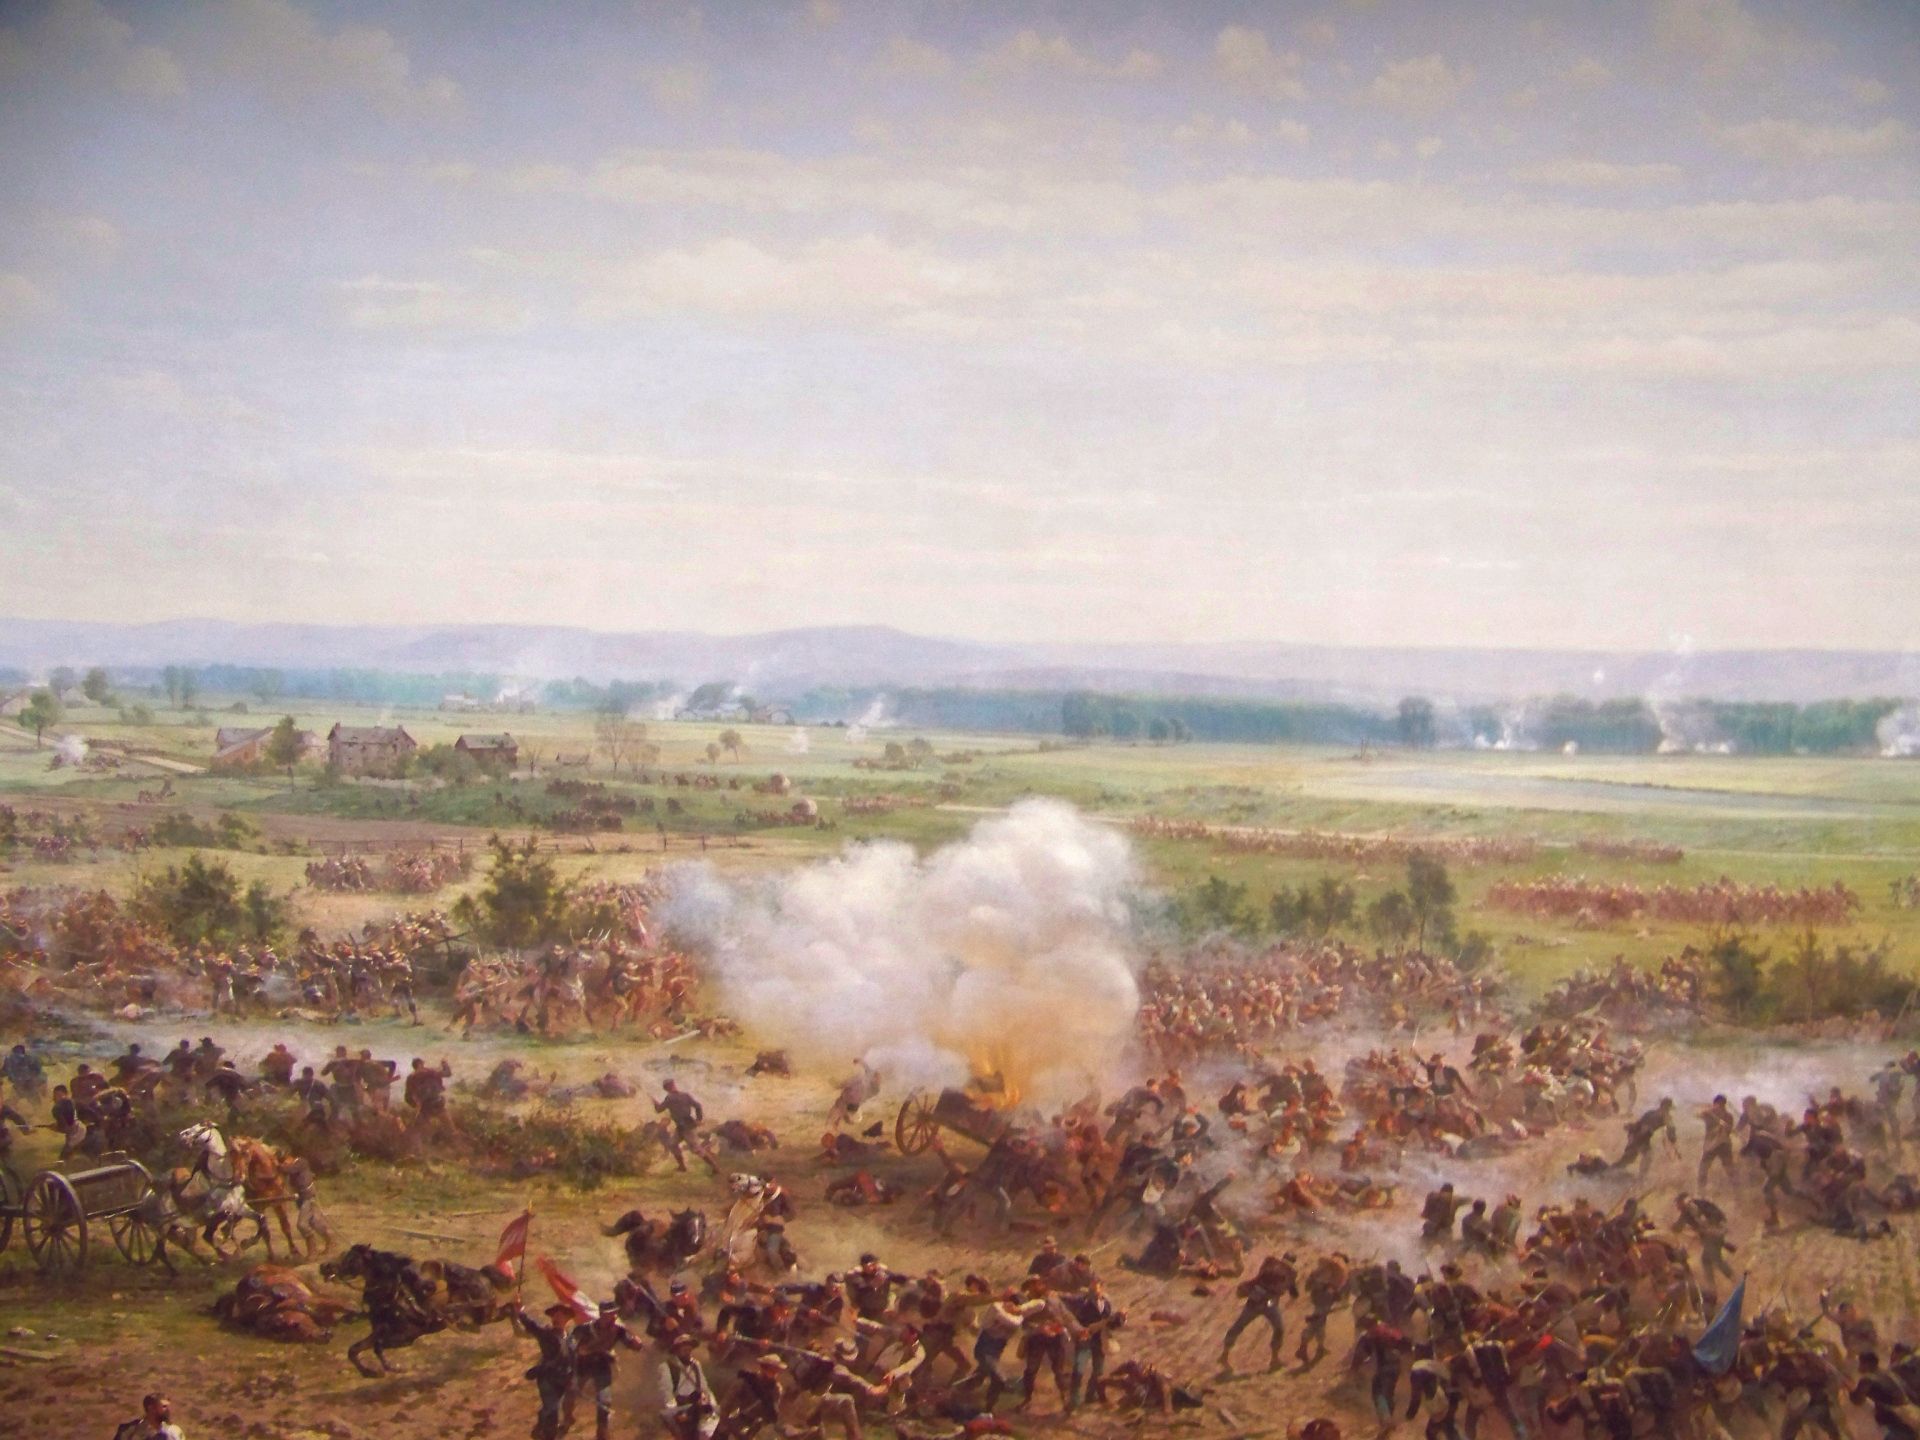 Pickett's Charge, The Gettysburg Cyclorama (author photo)